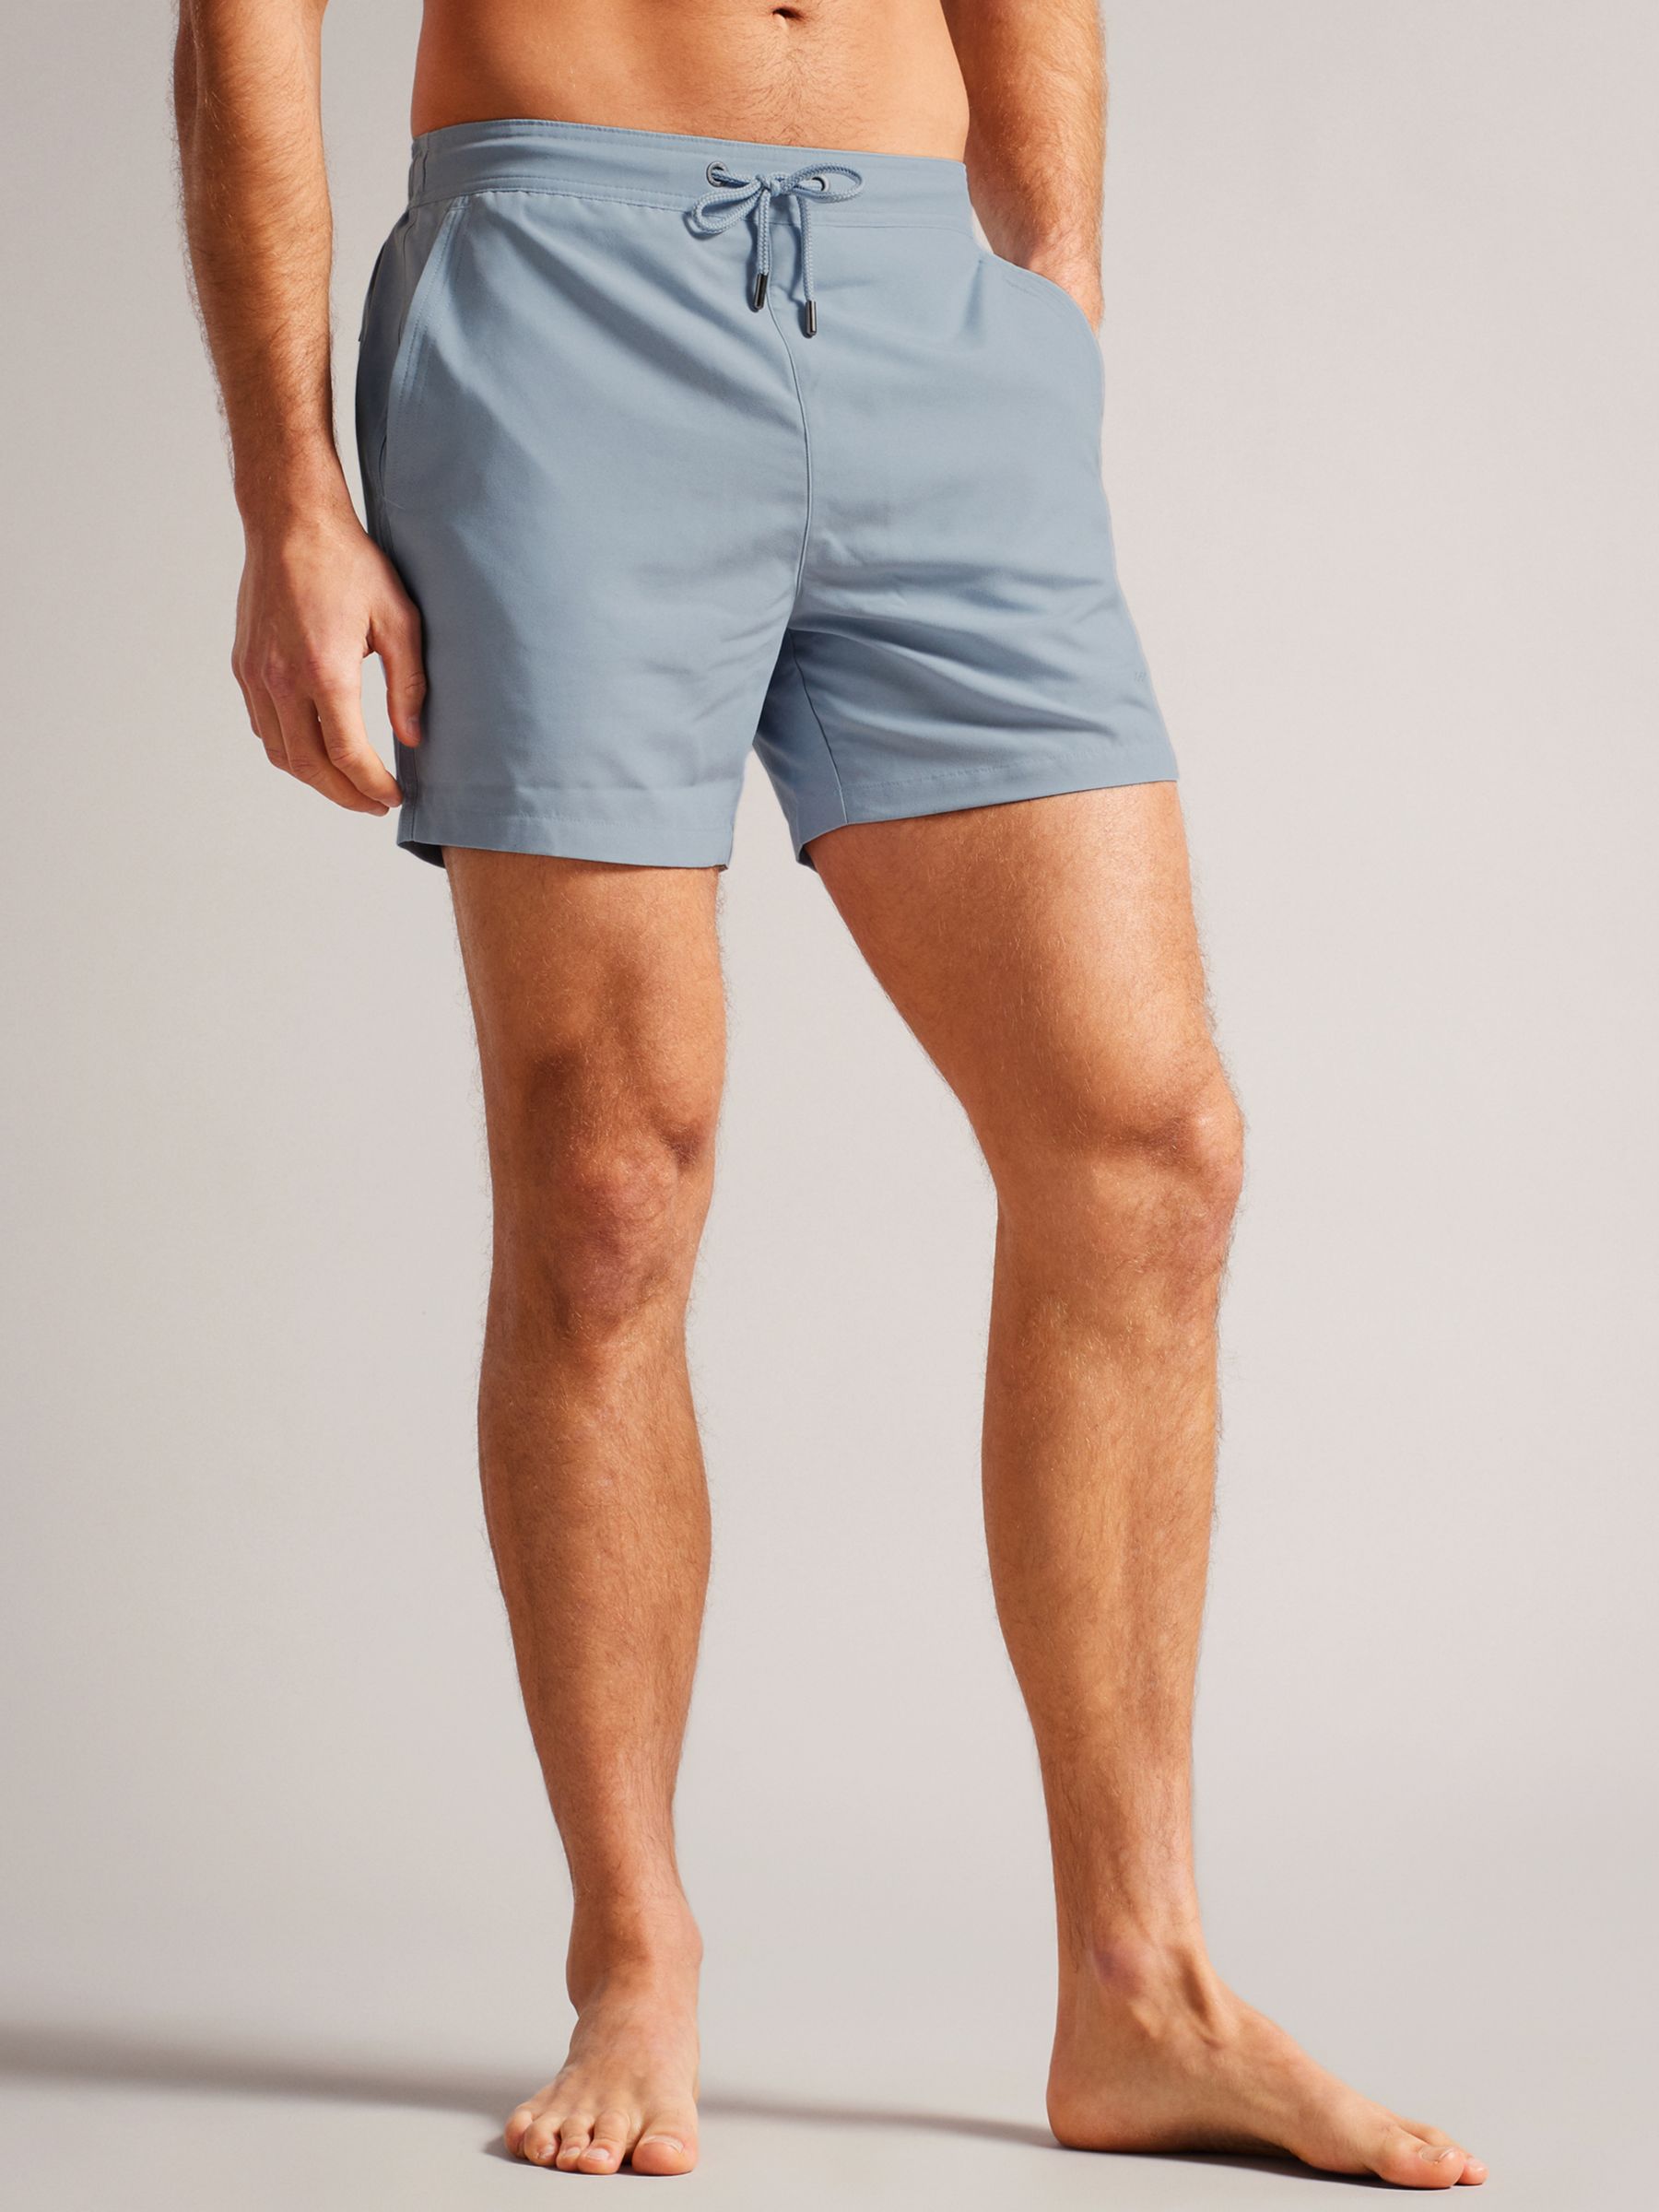 Ted Baker Hiltree Swimming Trunks, Mid Blue, XL